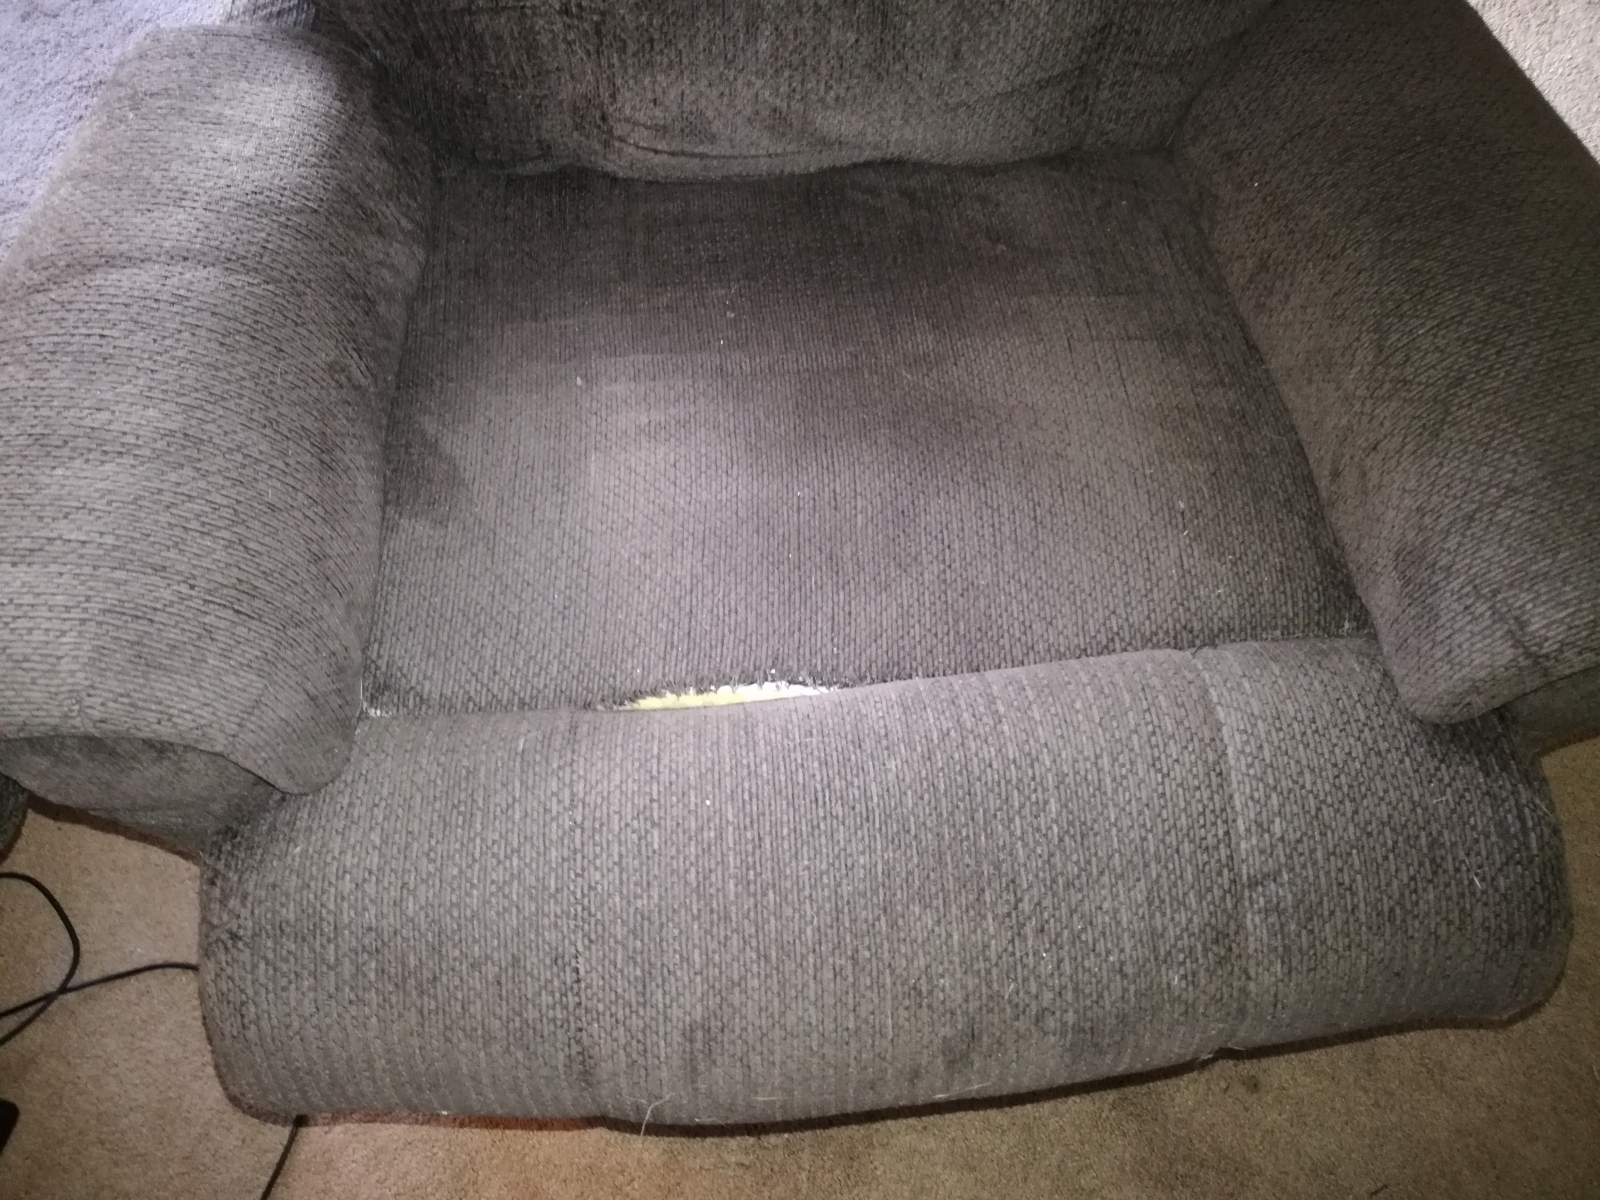 Defective chair for almost $400!